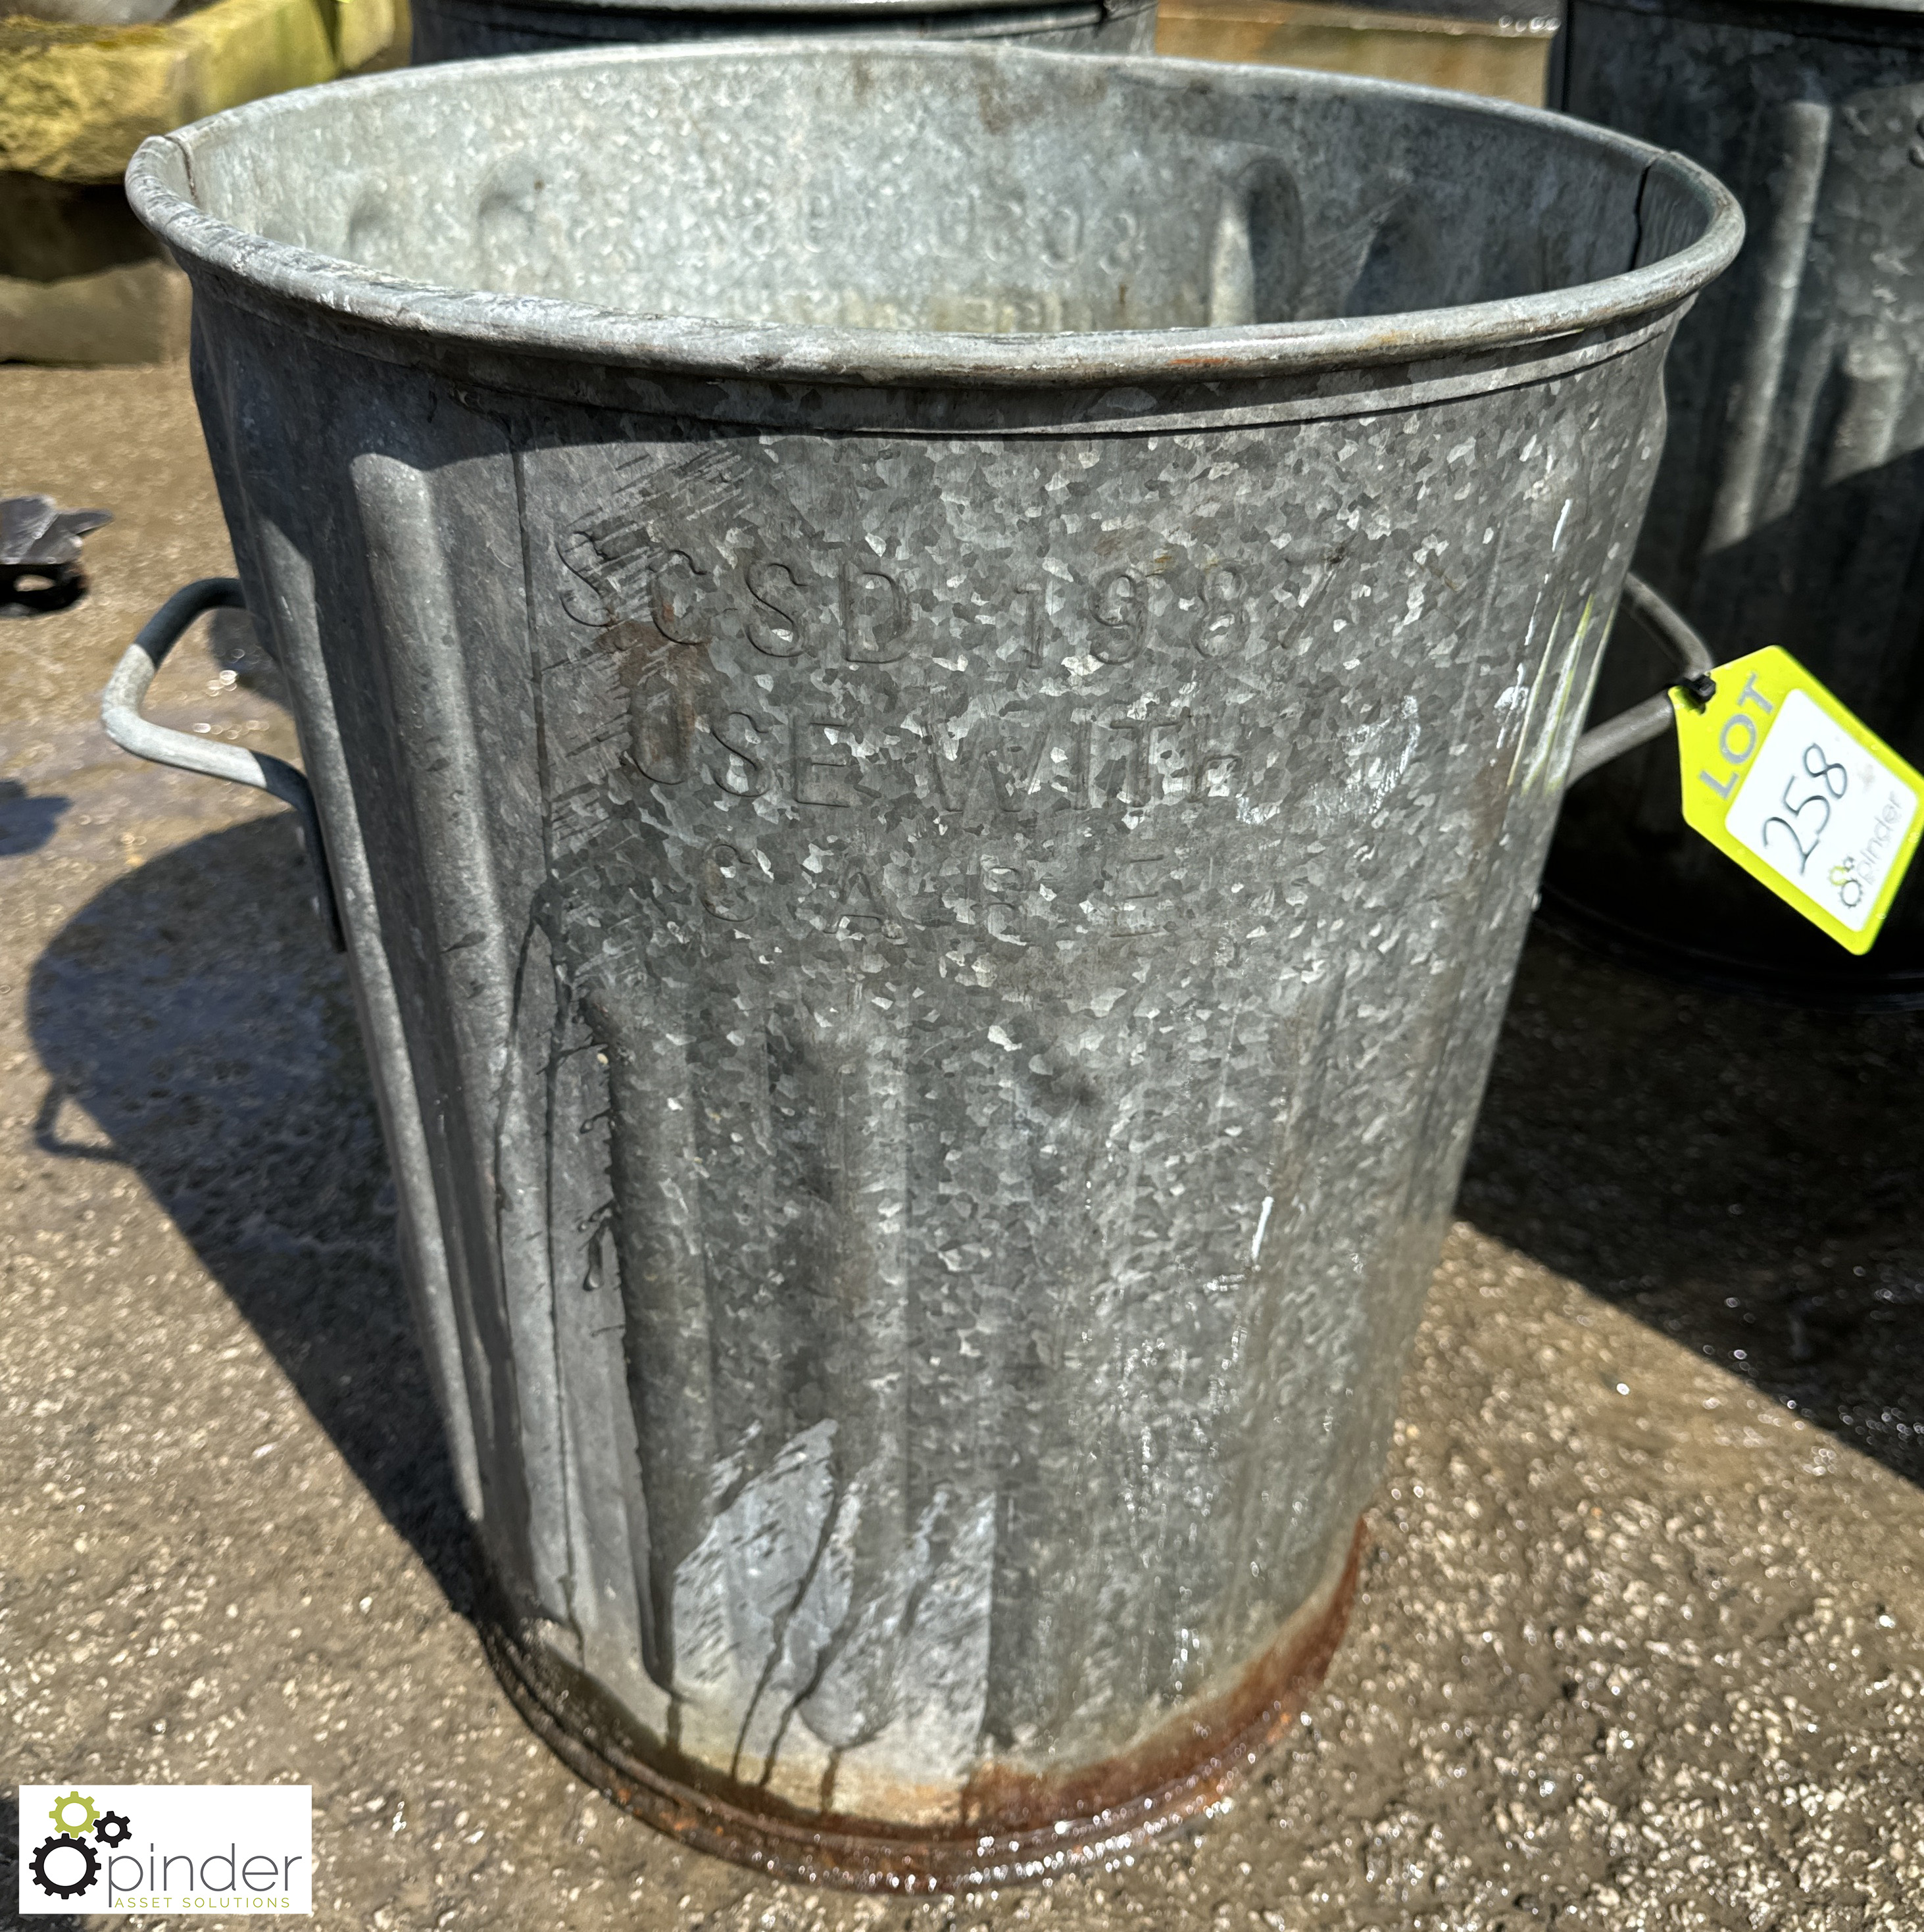 Antique galvanised metal Dustbin, with lifting handles, approx. 22in x 18in diameter, circa early to